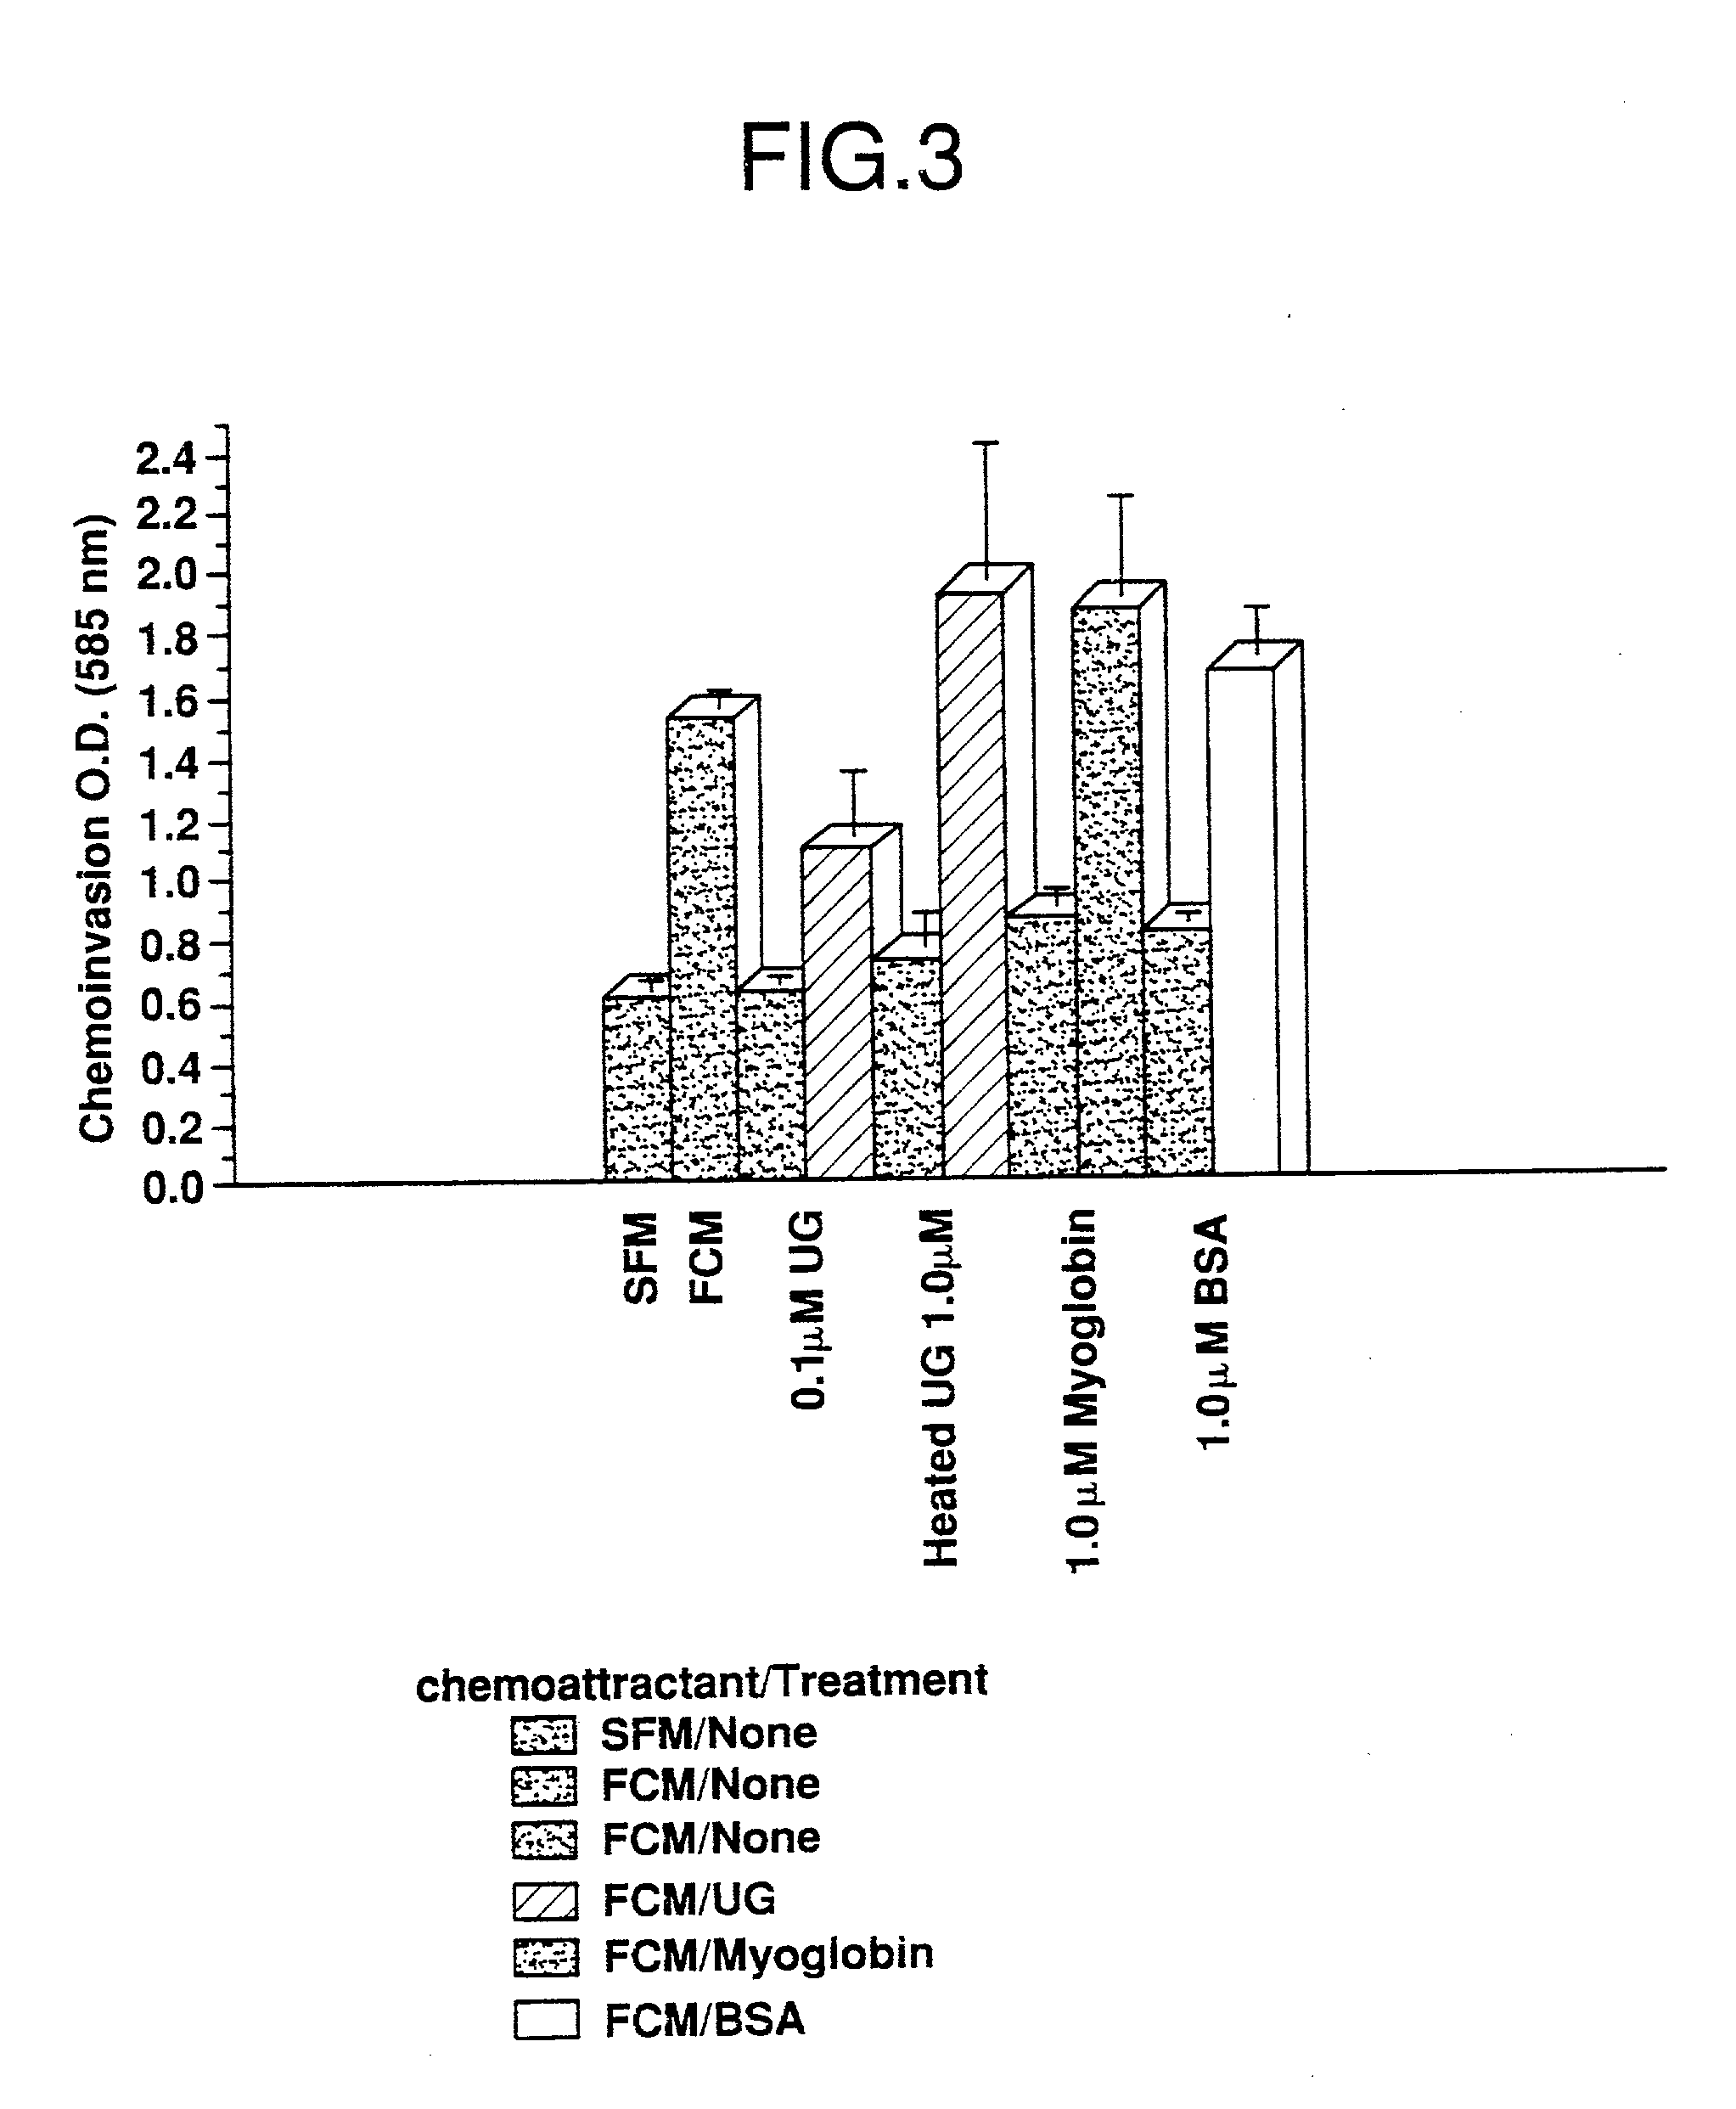 Pharmaceutical compositions, methods, and kits for treatment and diagnosis of lung cancer